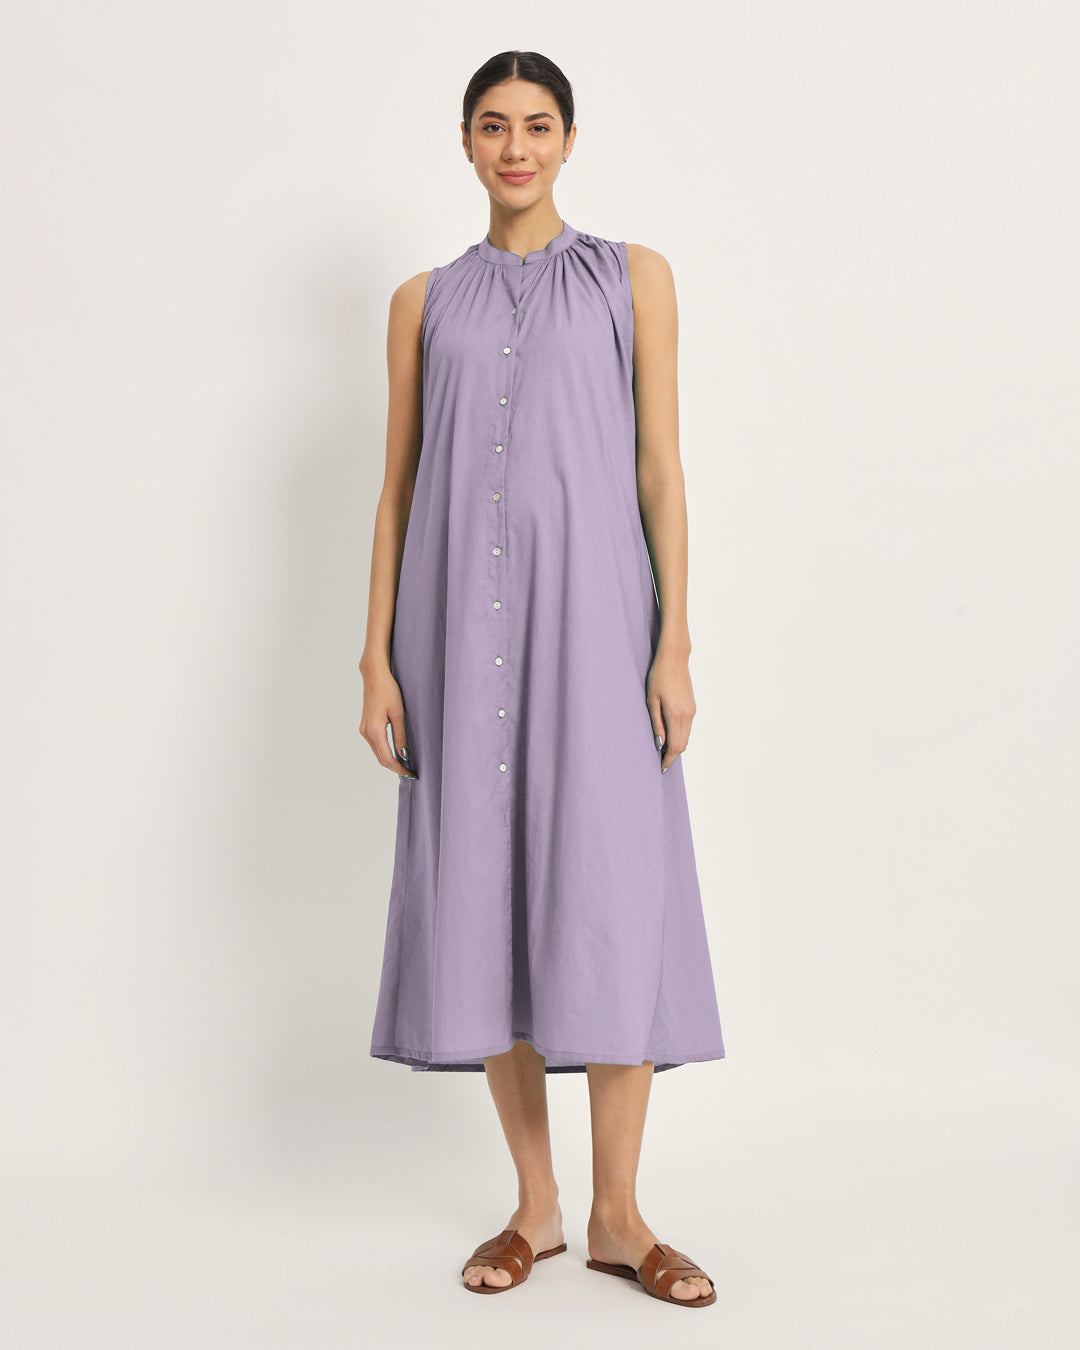 Combo: Lilac & Wisteria Purple Mommy Must-Haves Maternity & Nursing Dress